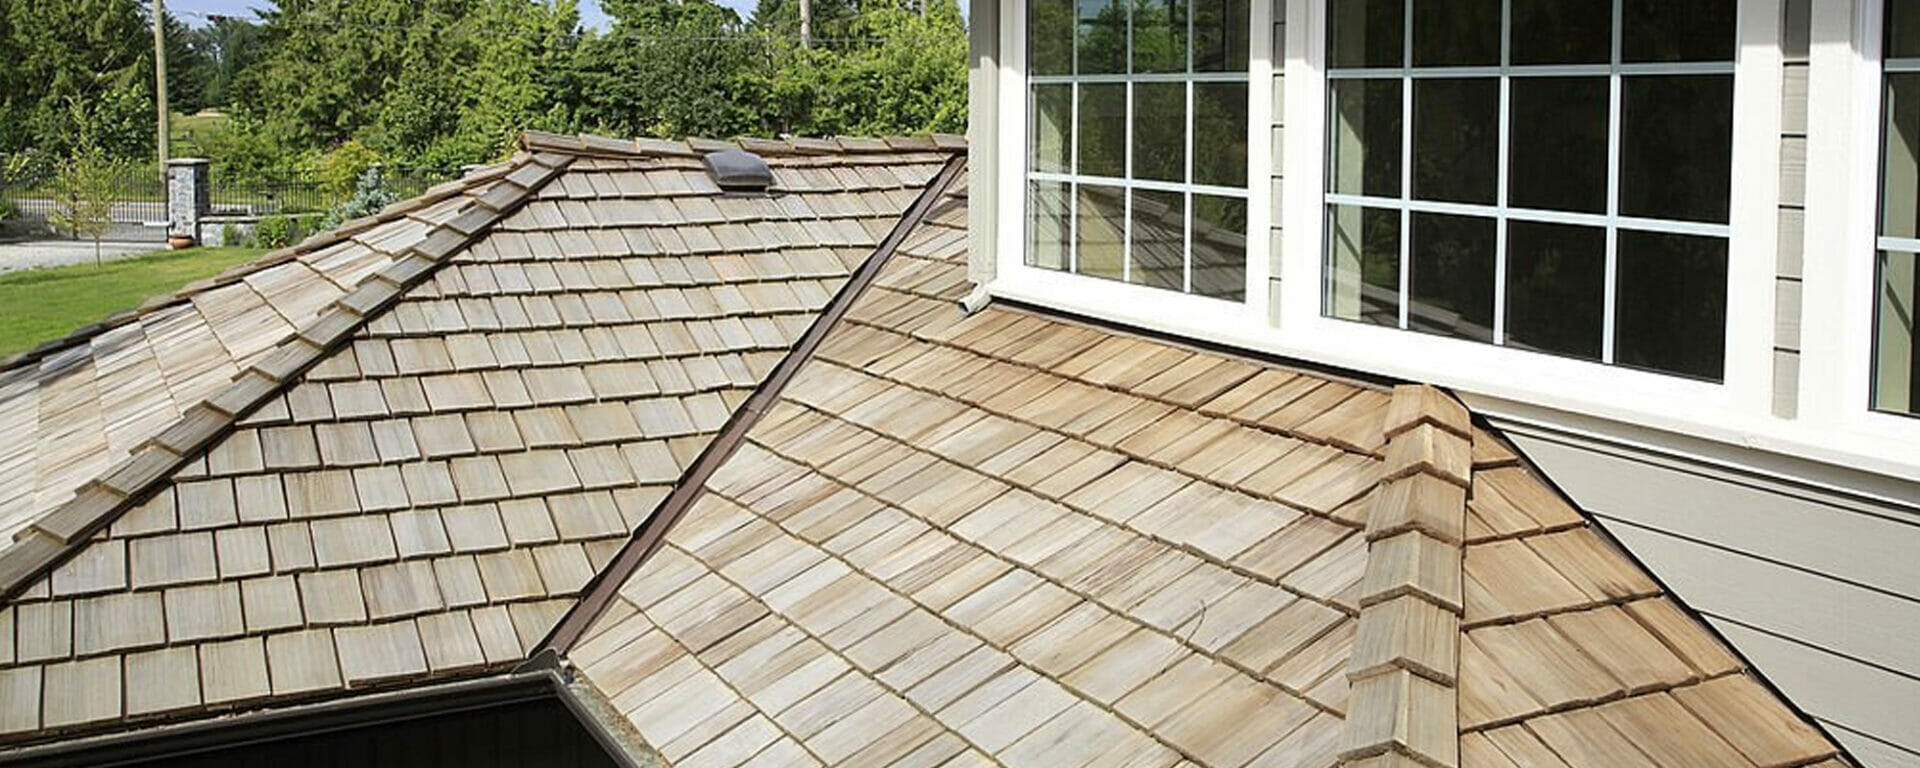 What is the Typical Cost of a Cedar Shake Roof in Charleston?